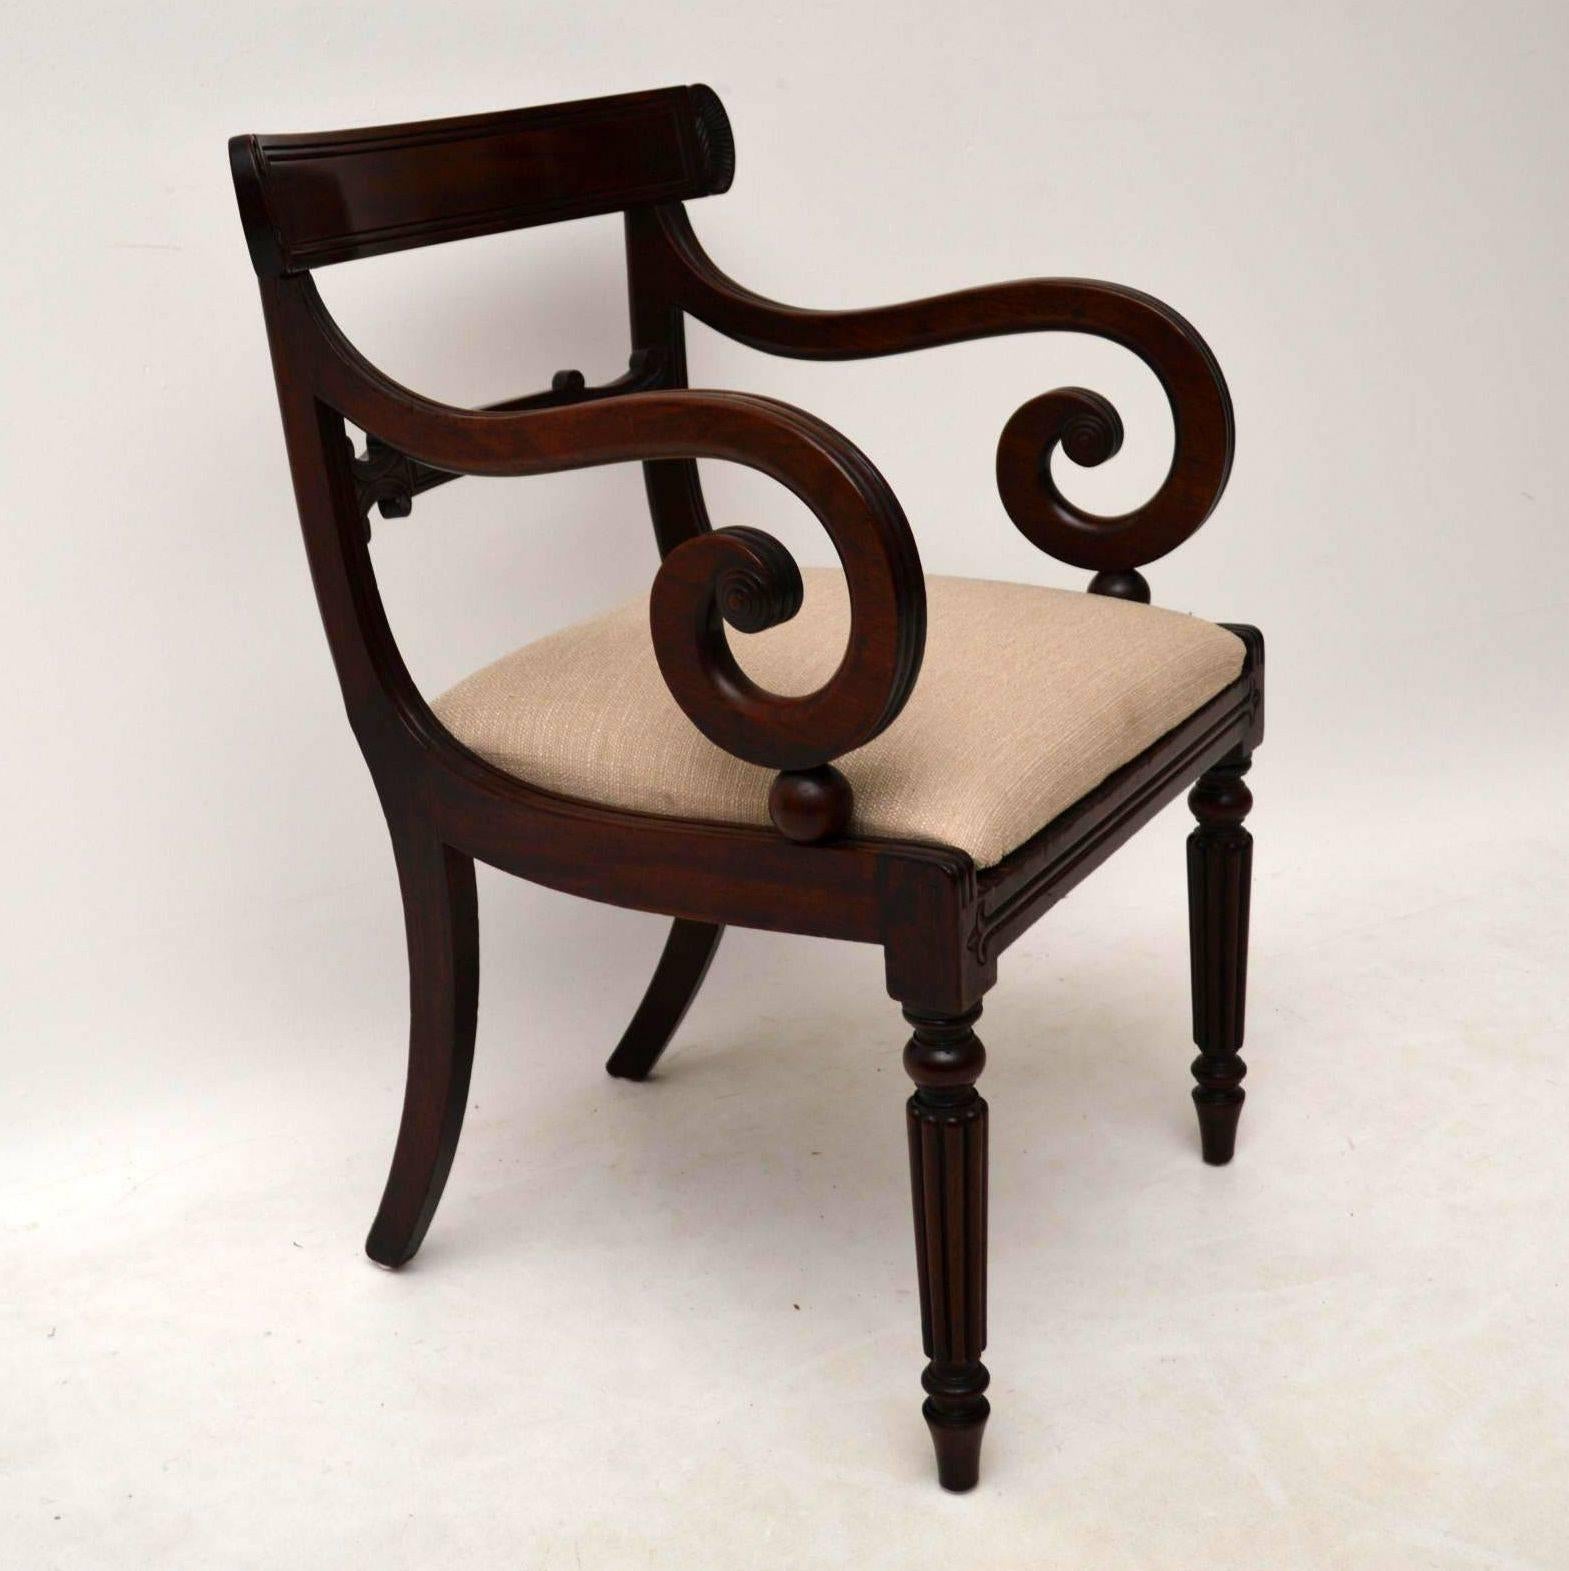 Good quality original William IV solid mahogany armchair, which would be ideal as a desk chair. It's in great condition, dating from around the 1830s-1840s period. We have just had it restored and French polished. The seat has also been